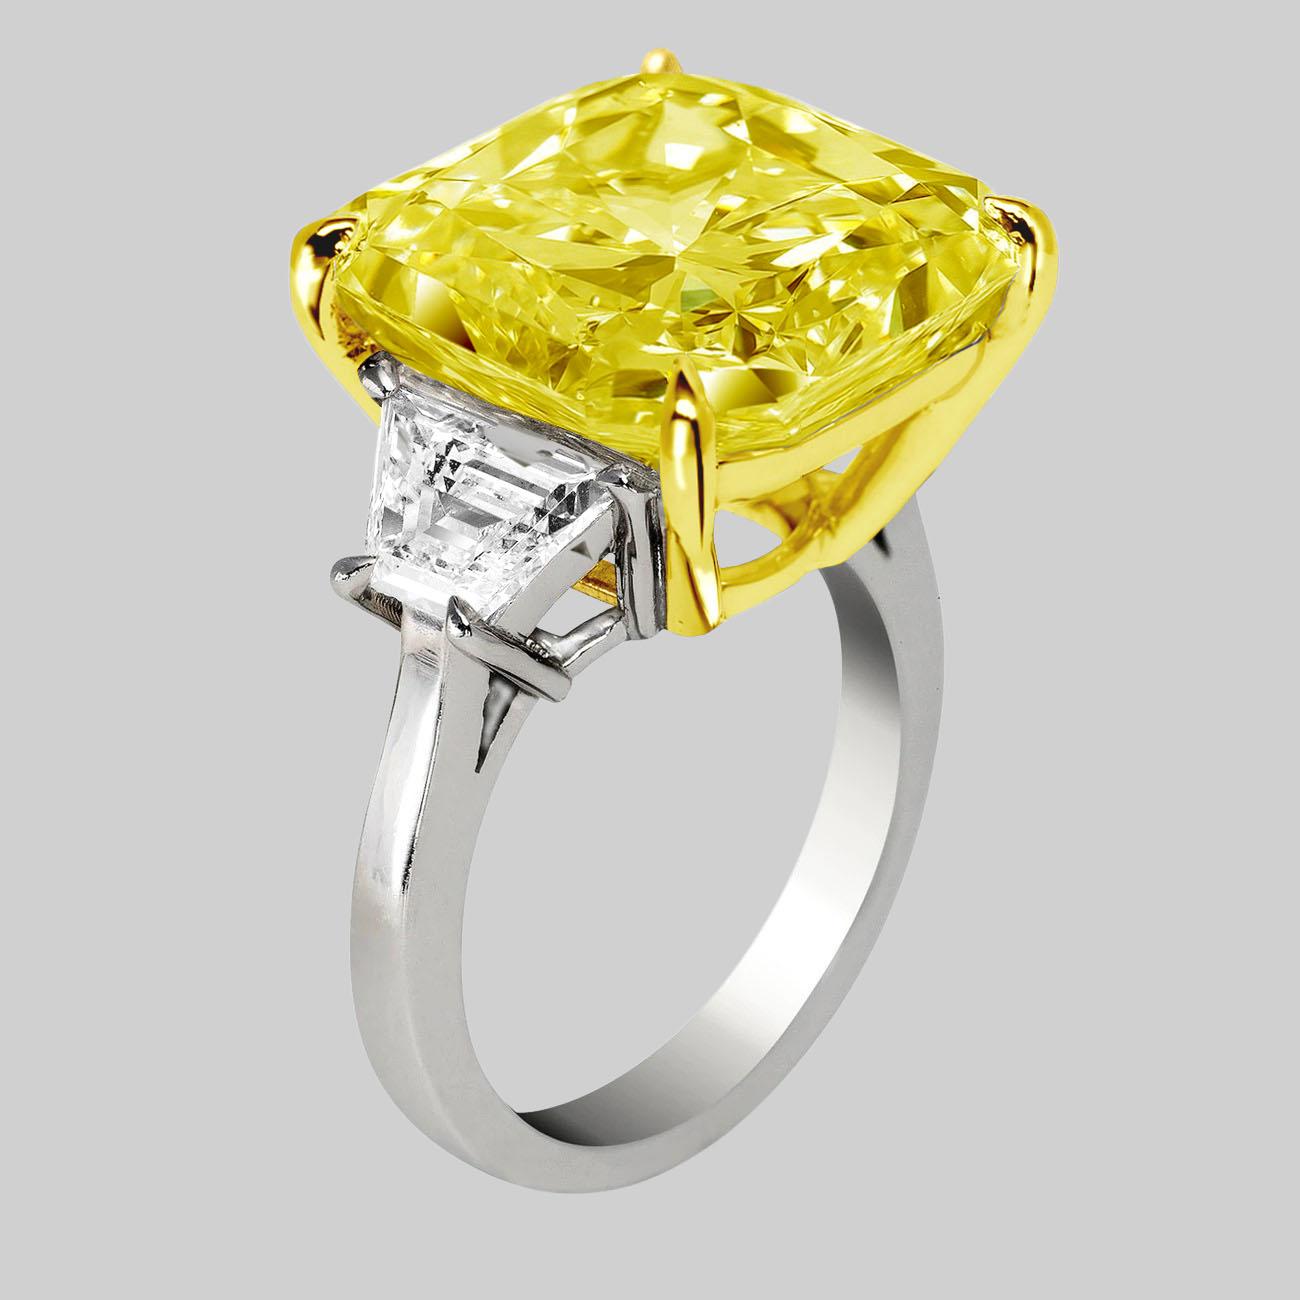 Antinori di Sanpietro fancy yellow color Cushion Cut Engagement Ring and this ring is perfection with a 6 carat Fancy Yellow Cushion Cut Diamond of VVS2 clarity, GIA Certified, with 1 carat in F Color side trapezoid cut diamonds in Platinum and 18